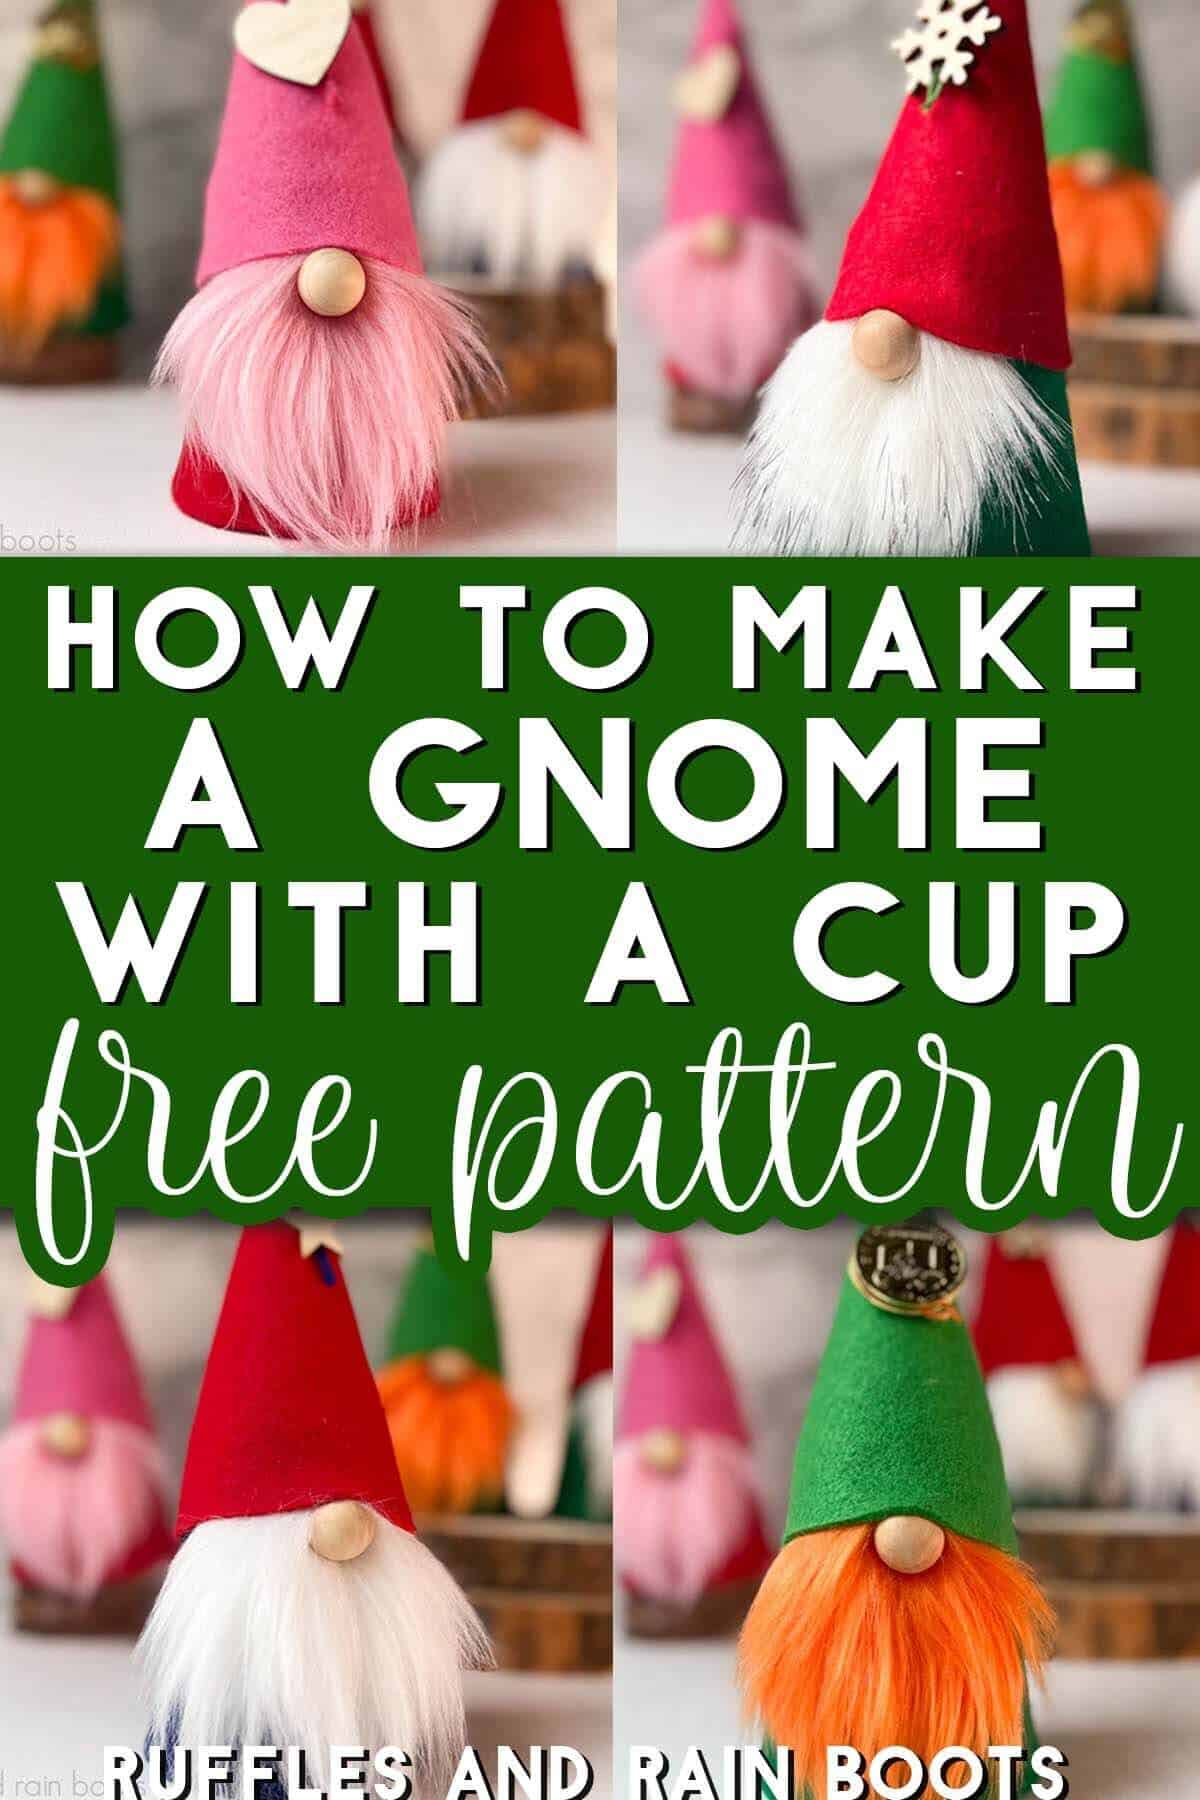 Collage of four holiday gnomes with text which reads how to make a gnome with a cup free pattern.